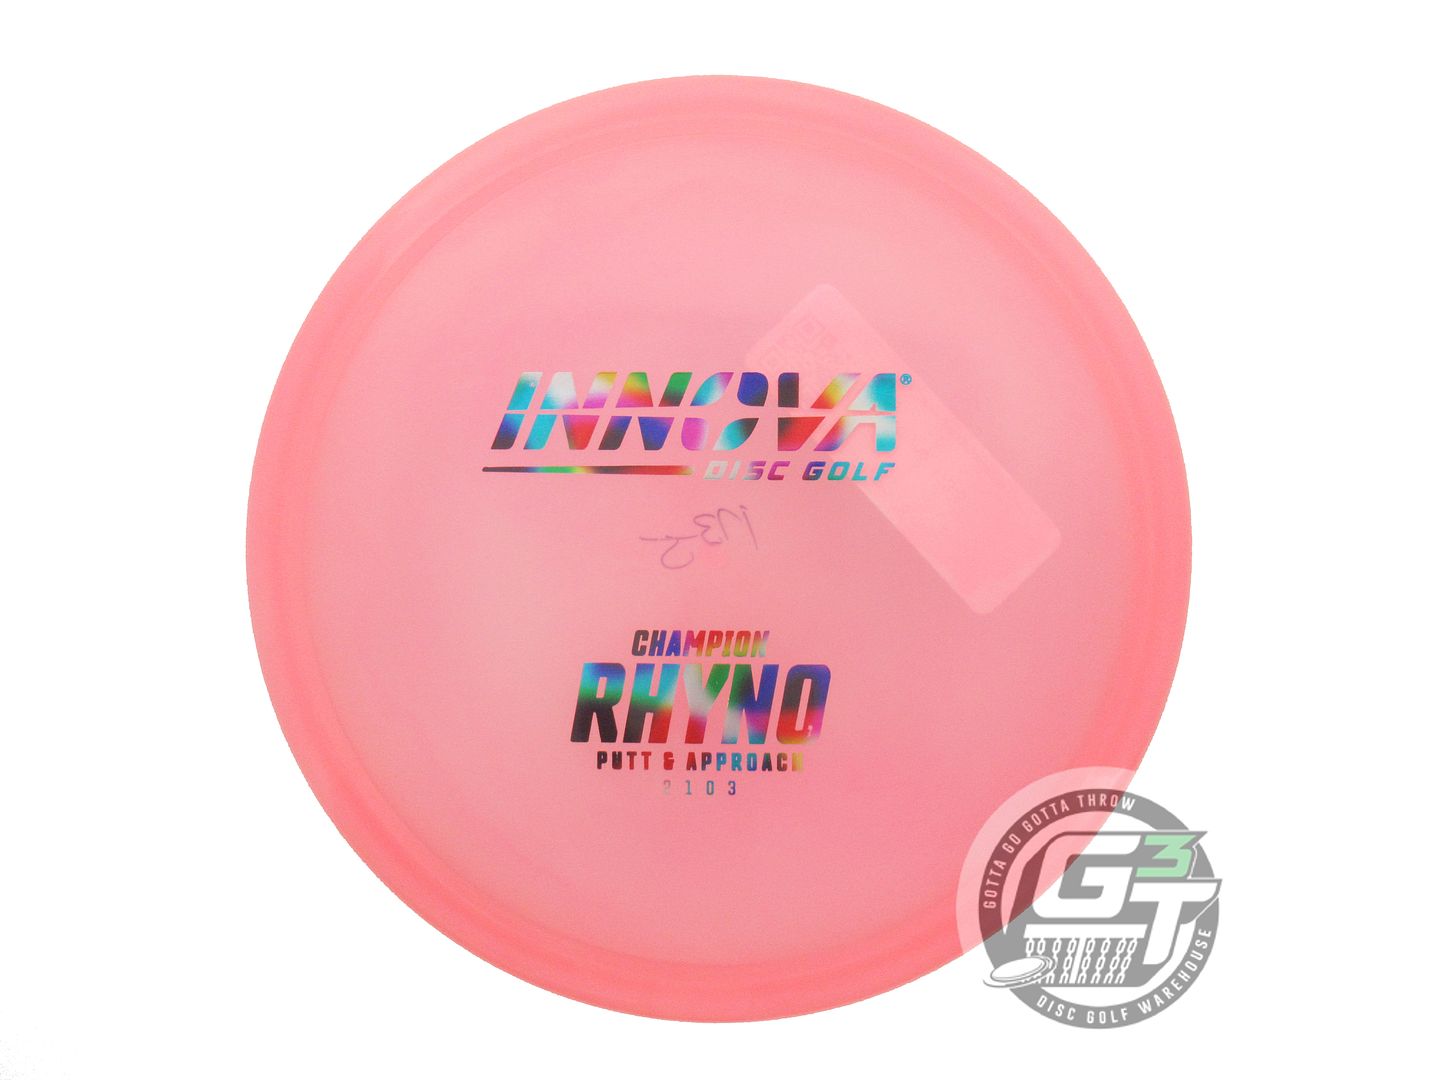 Innova Champion Rhyno Putter Golf Disc (Individually Listed)